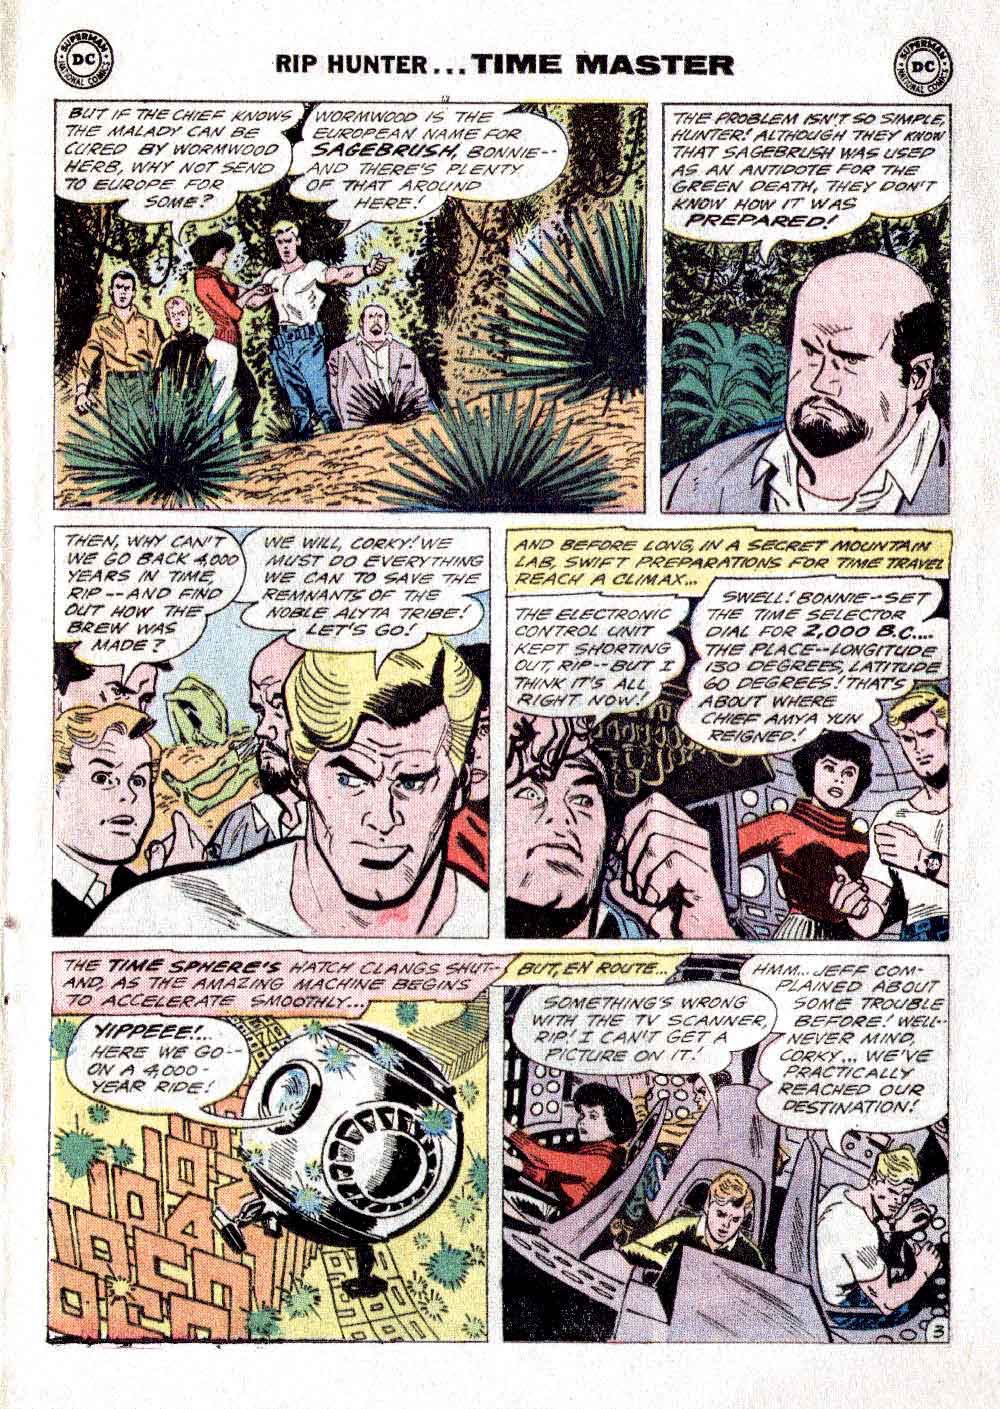 Rip Hunter Time Master v1 #7 dc silver age 1960s comic book page art by Alex Toth